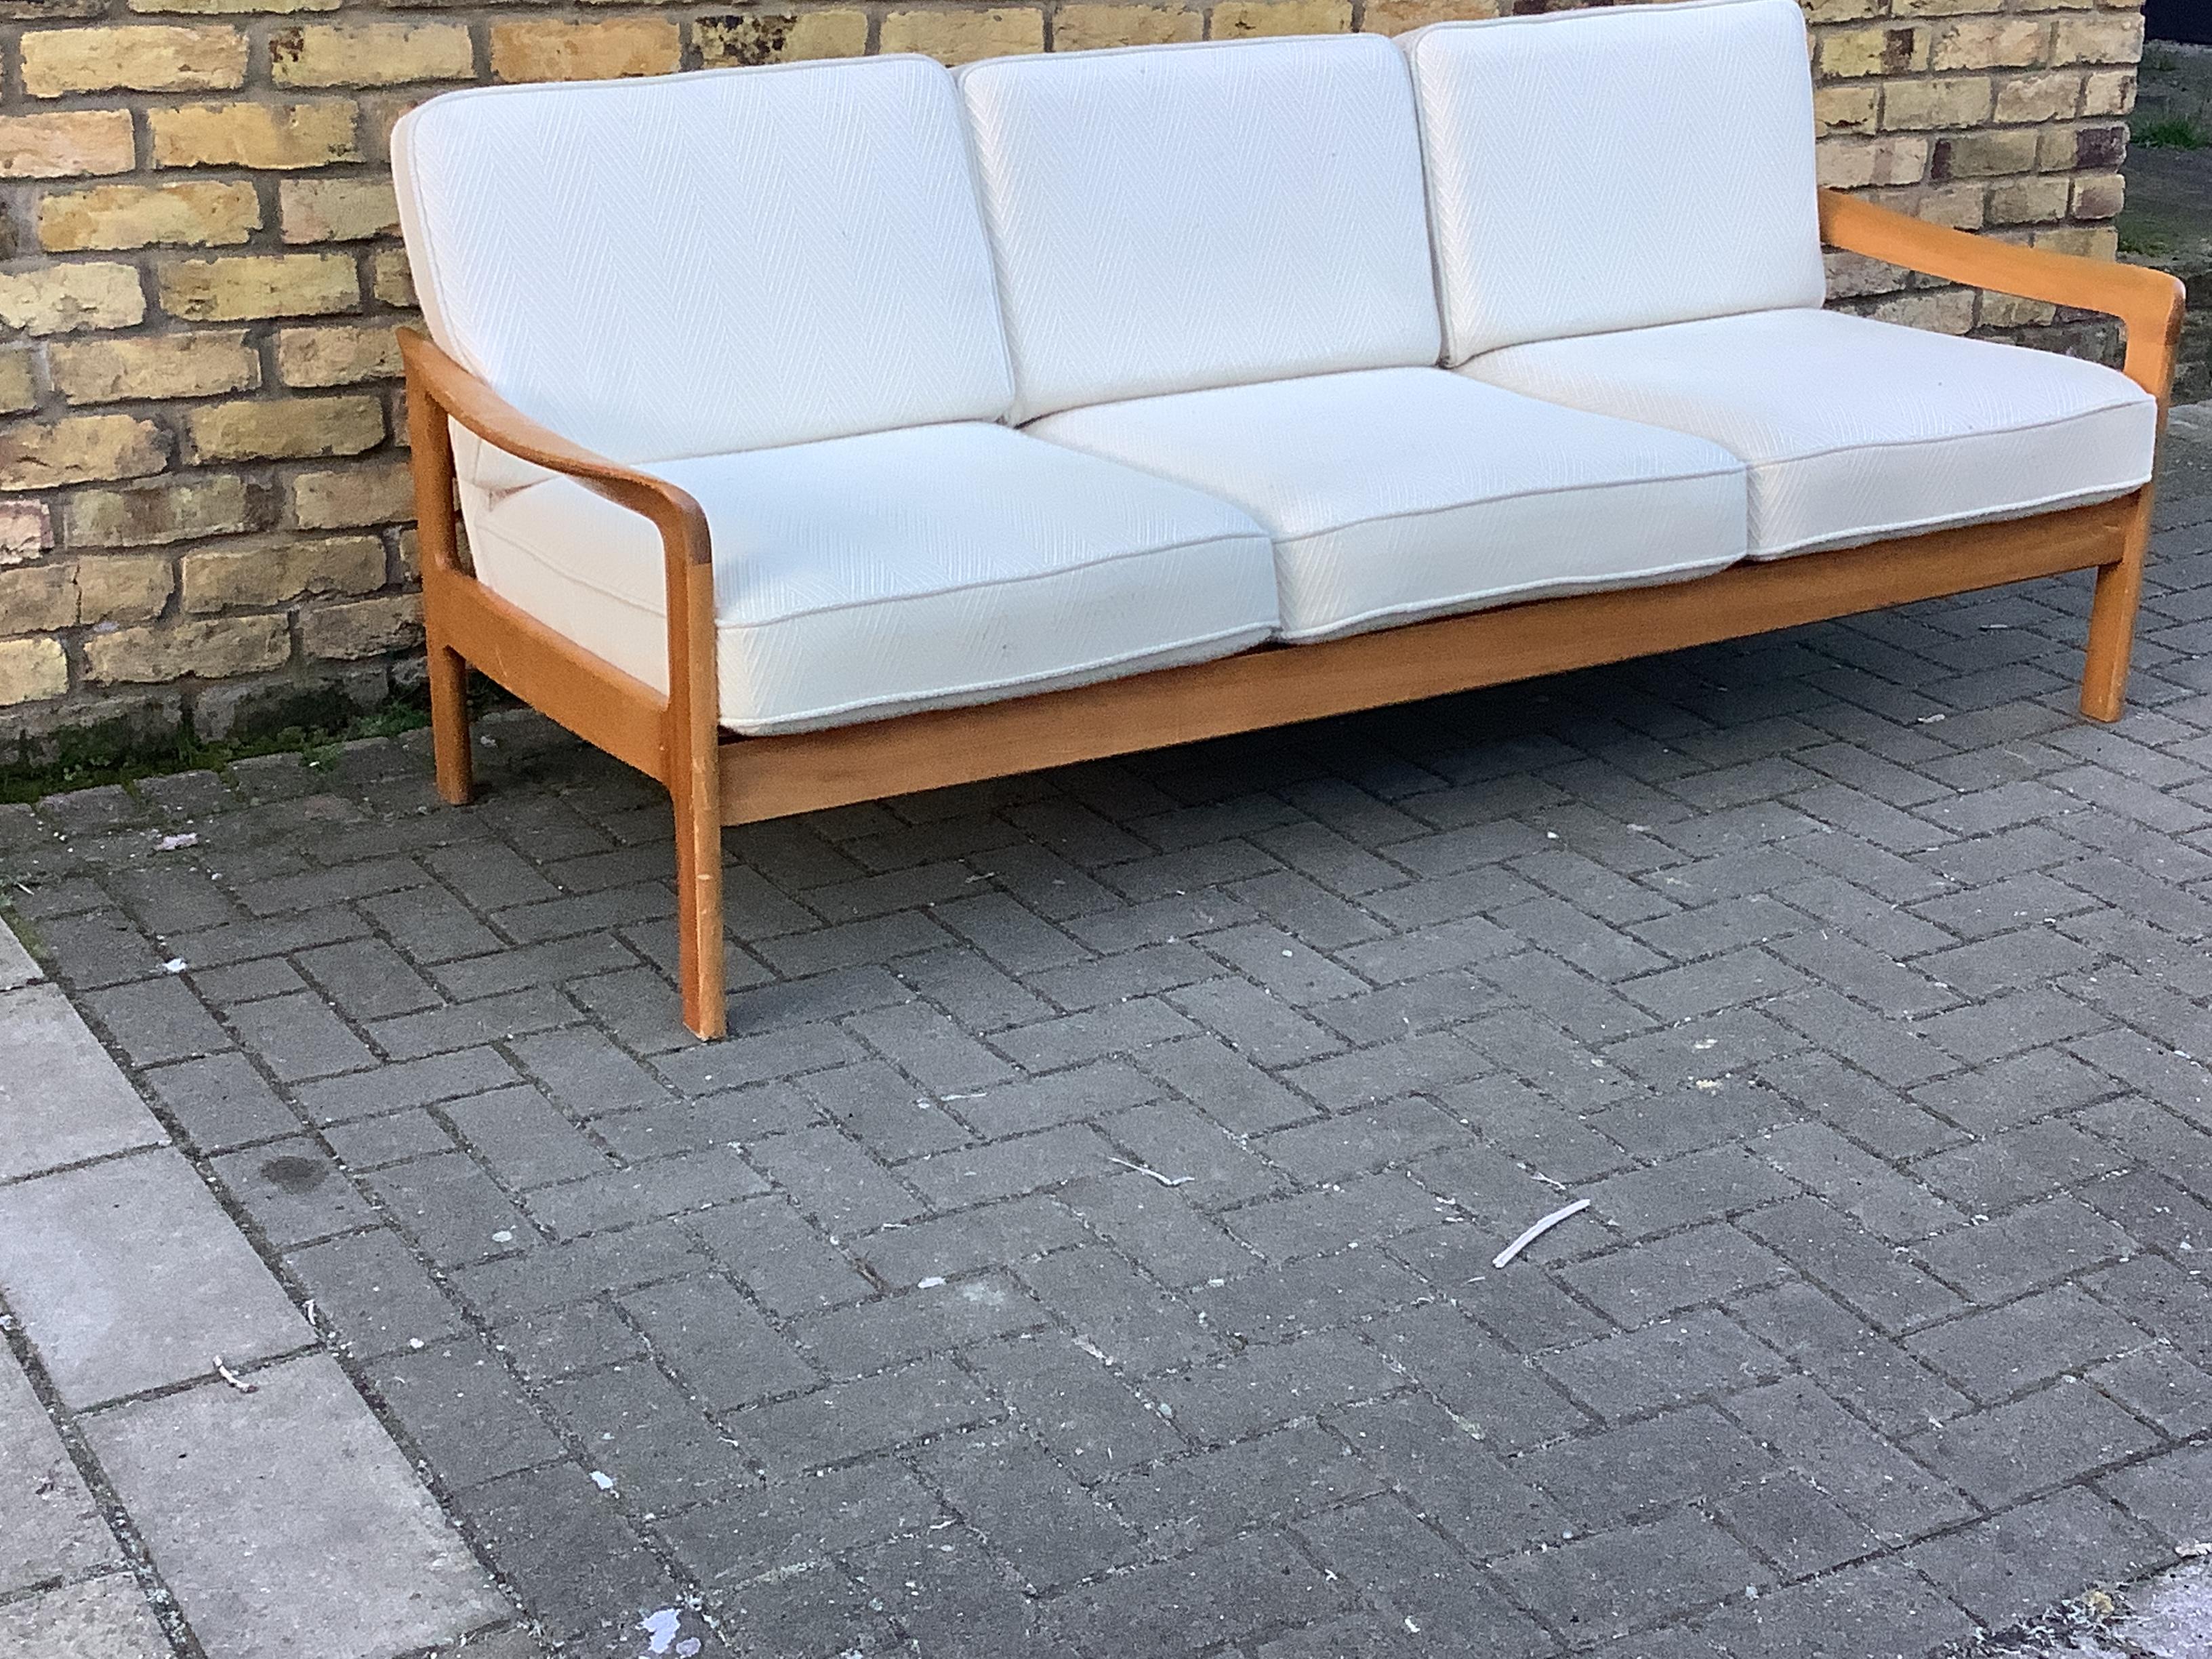 Classic Danish 3 seater sofa with wool upholstery the seats cushions are sprung 
the frame is solid beech wood with a flared arms design super comfortable.
Cc1970s